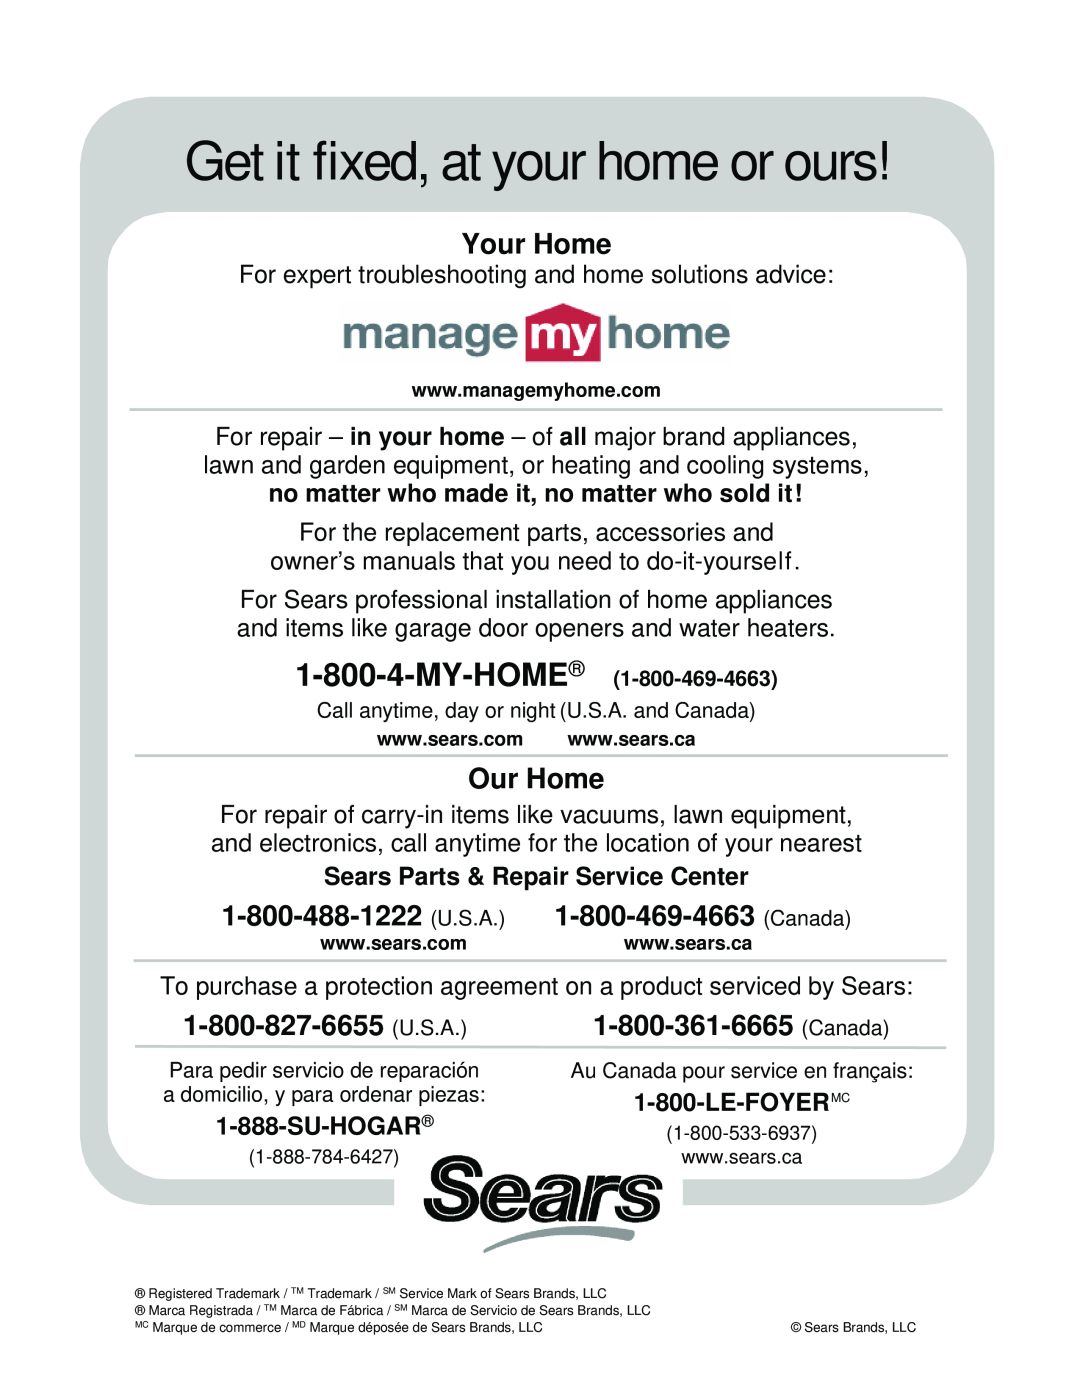 Craftsman 127.28875 manual Your Home, Our Home, Sears Parts & Repair Service Center, Su-Hogar, Le-Foyermc 